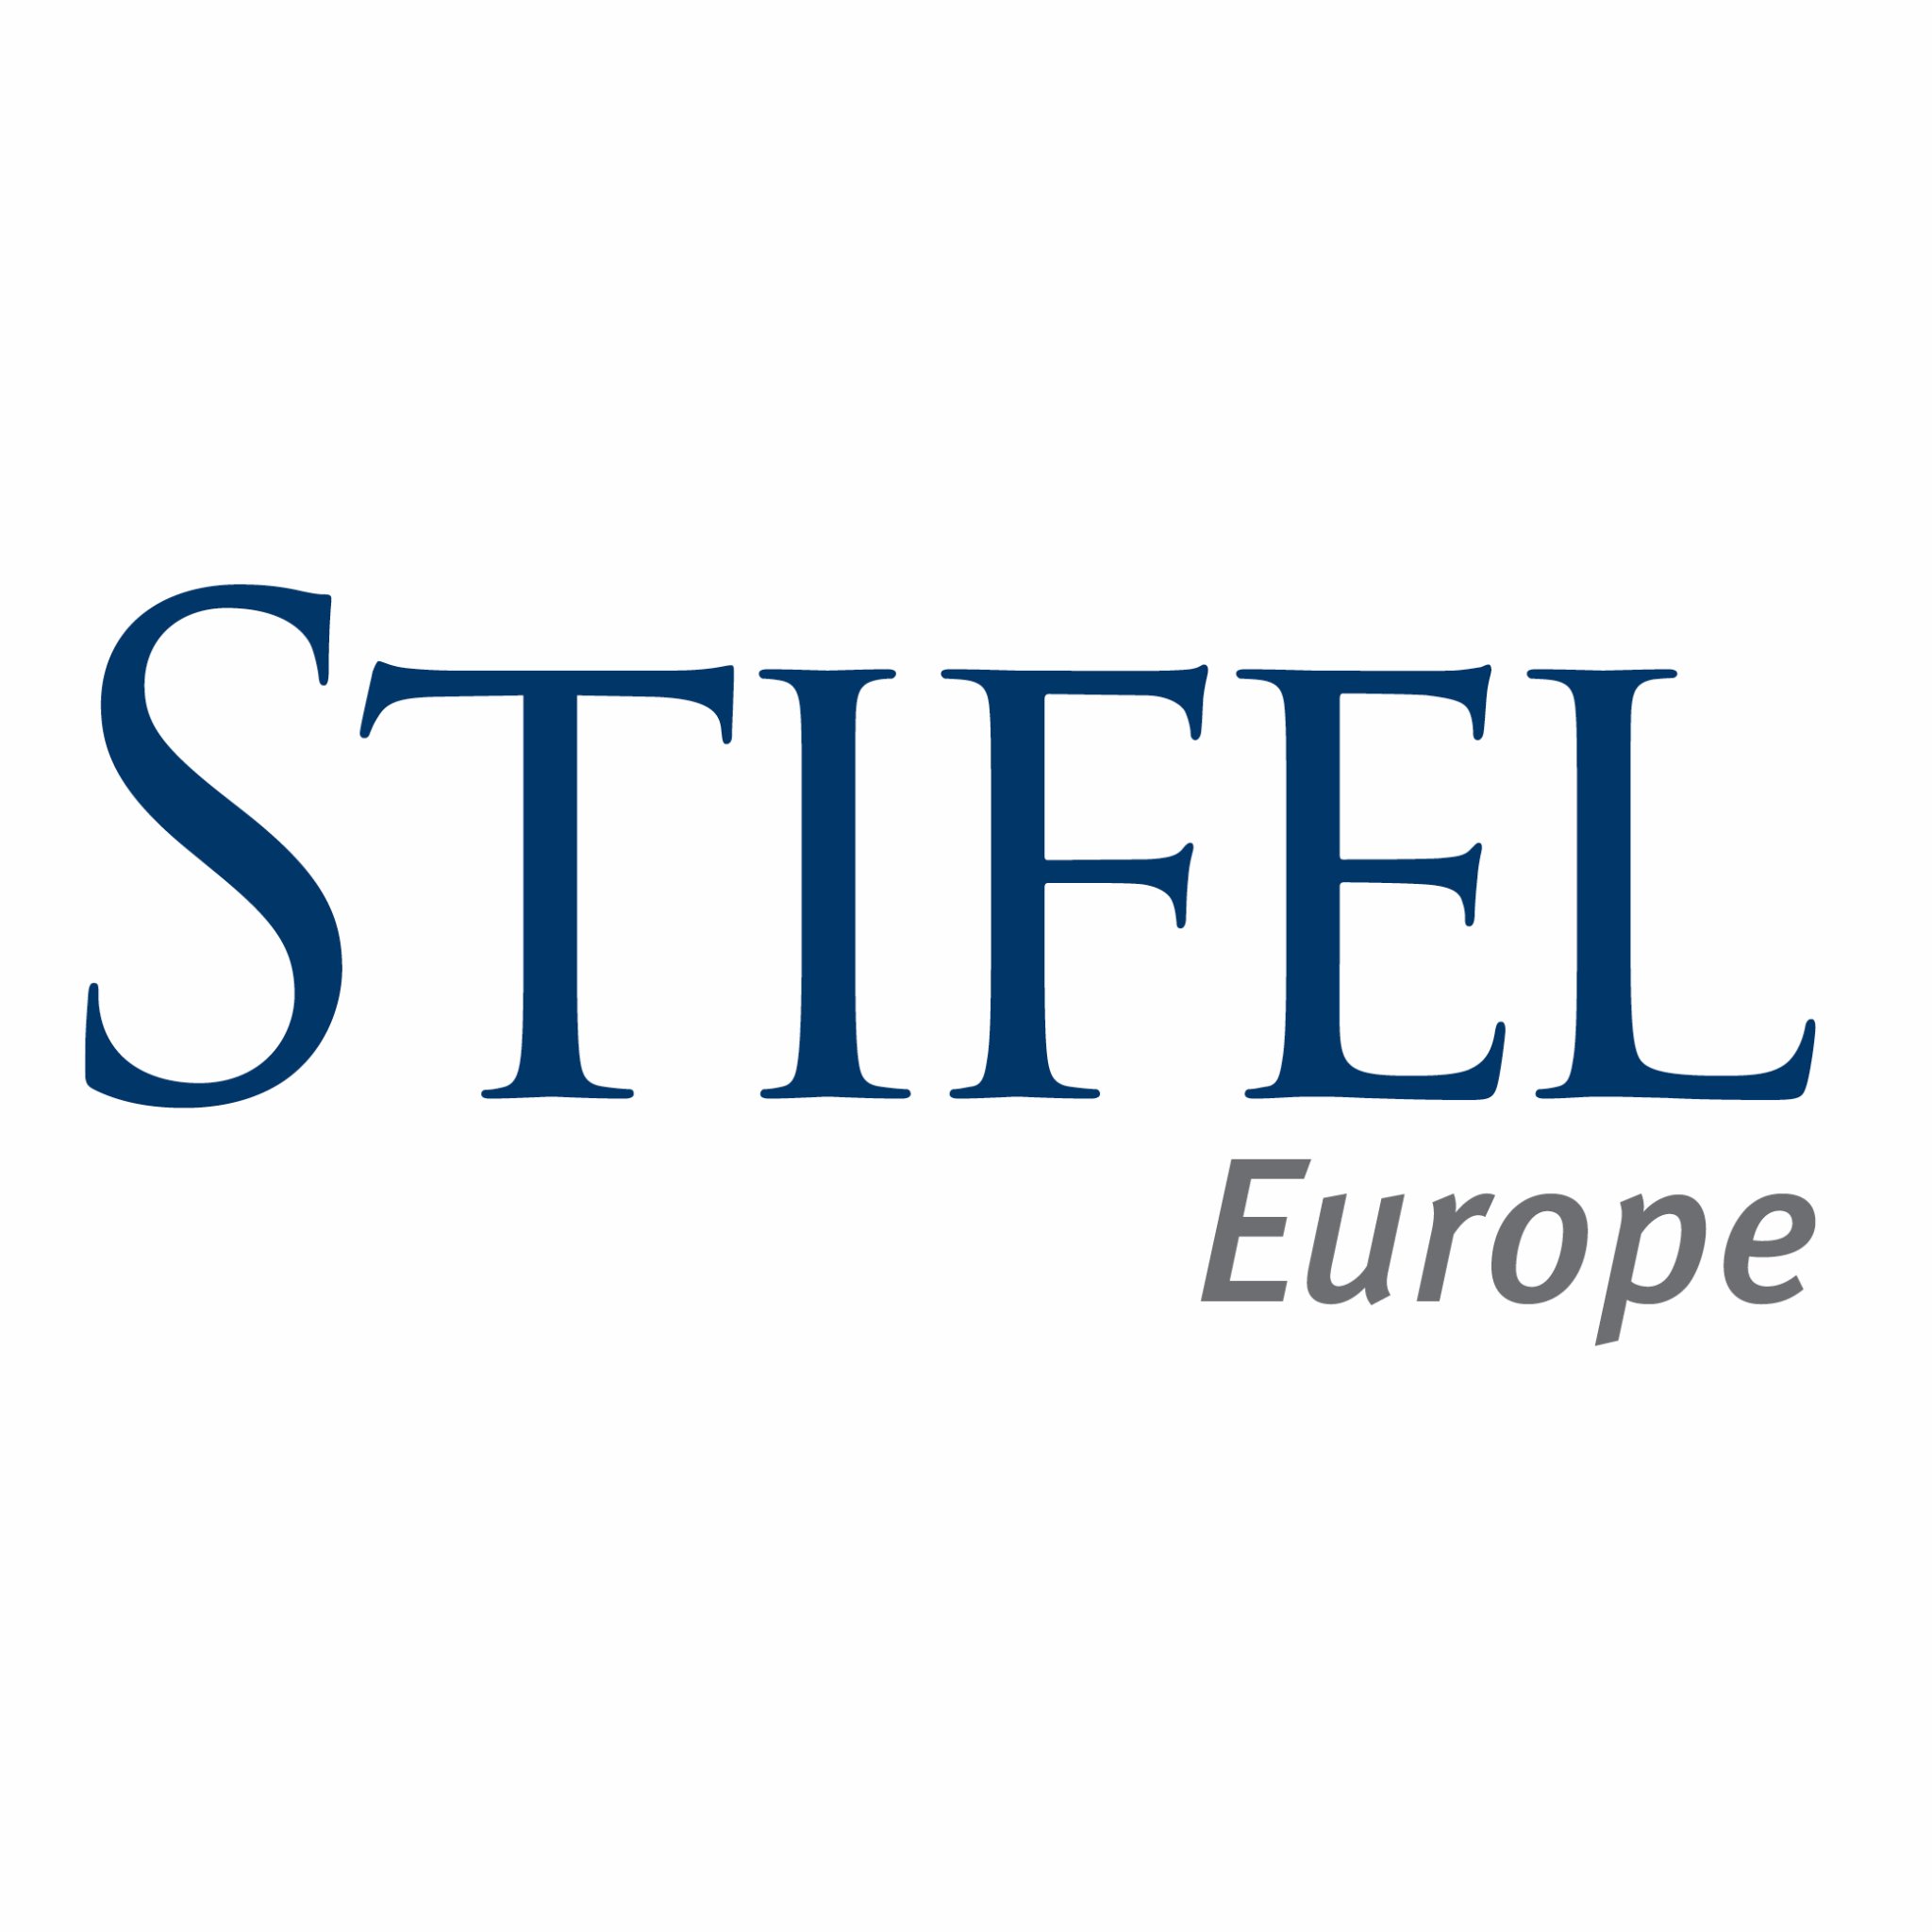 Stifel Europe Fixed Income Research | All European Fixed Income research is now available free to eligible recipients. View our T&Cs: https://t.co/HhM2I2jSeA